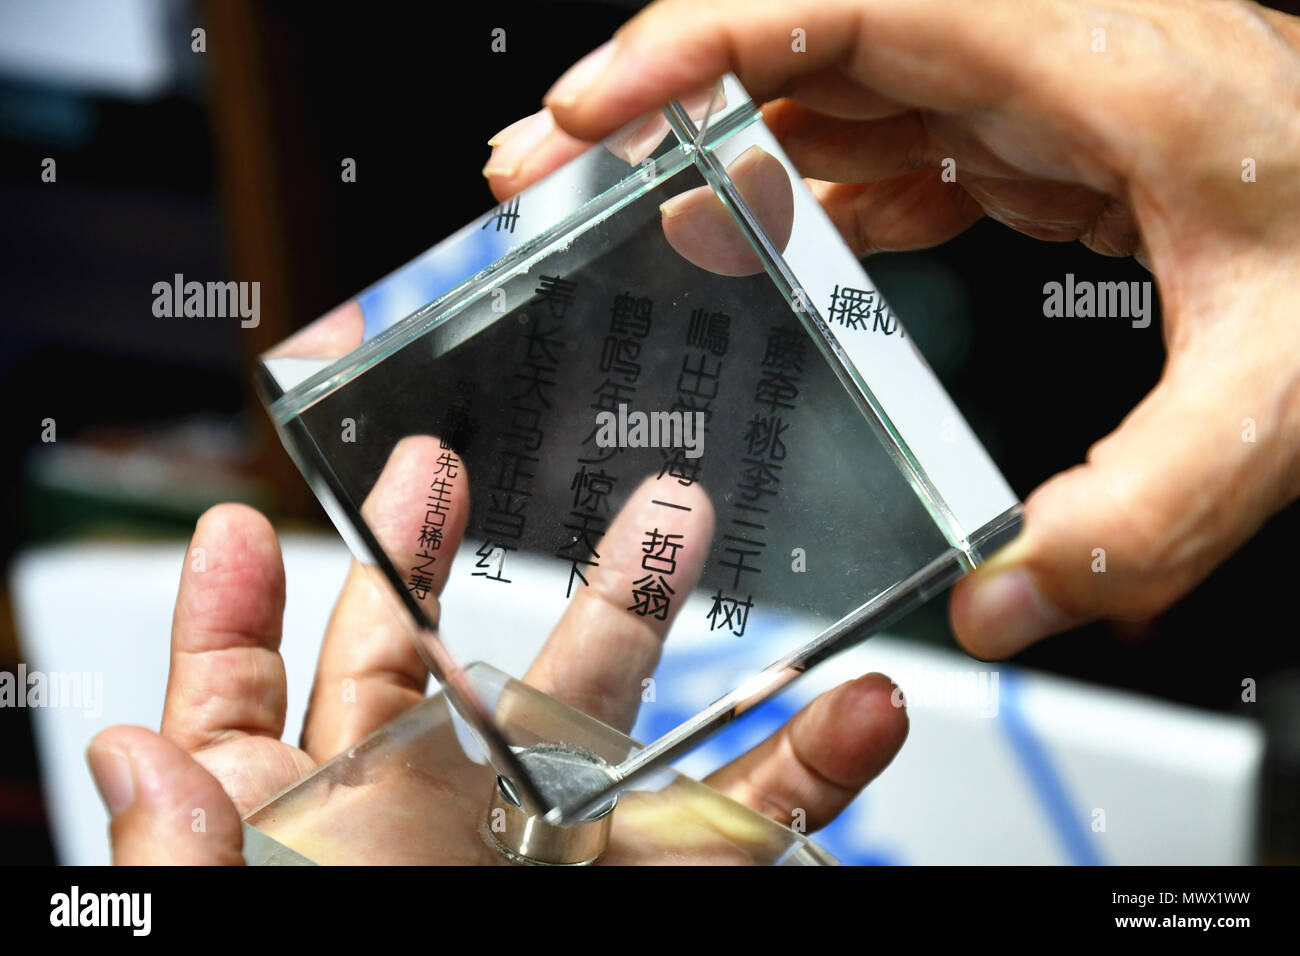 Tokyo. 29th May, 2018. Photo taken on May 29, 2018 in Tokyo, Japan shows a piece of glass artwork with a poem on it, which is a gift from Chinese students to Akira Fujishima, famous Japanese chemist and former president of Tokyo University of Science. TO GO WITH XINHUA FEATURE: Famed Japanese chemist Fujishima's Chinese complex. Credit: Hua Yi/Xinhua/Alamy Live News Stock Photo